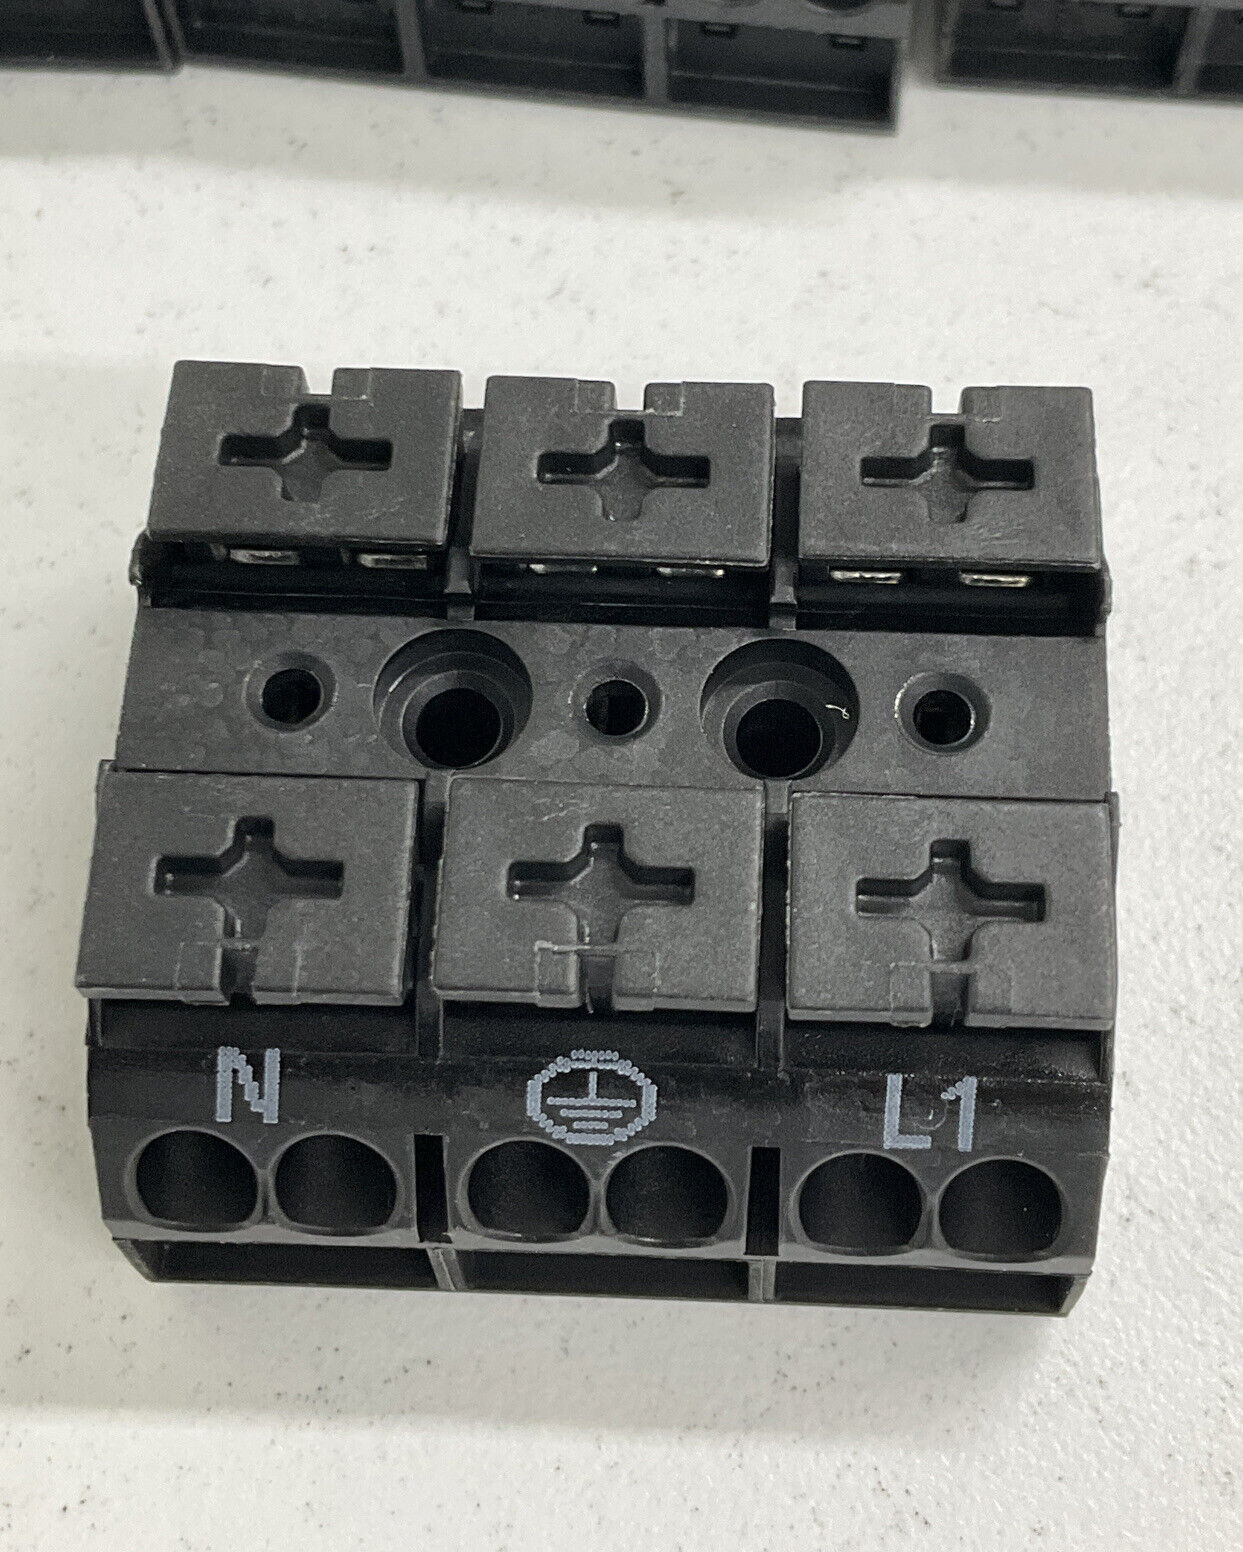 Wago 862-2503 4 Pole Chassis Mount Terminal Block Awg 20-12 10 Pieces (OV121)